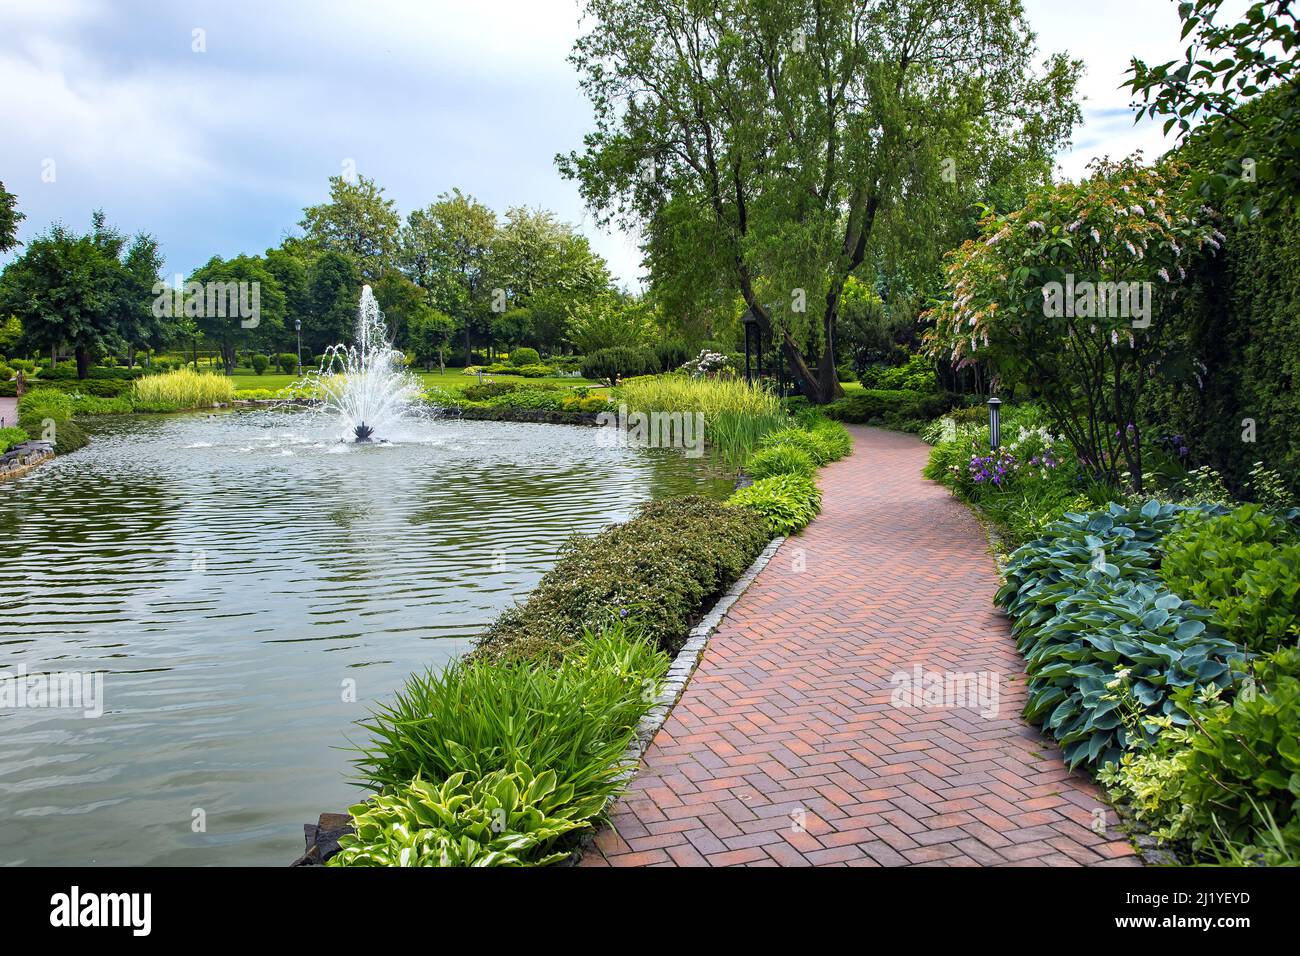 A pond filled with water with a spray jet fountain in a park with pedestrian sidewalks made of stone tiles among different plants, landscape design of Stock Photo